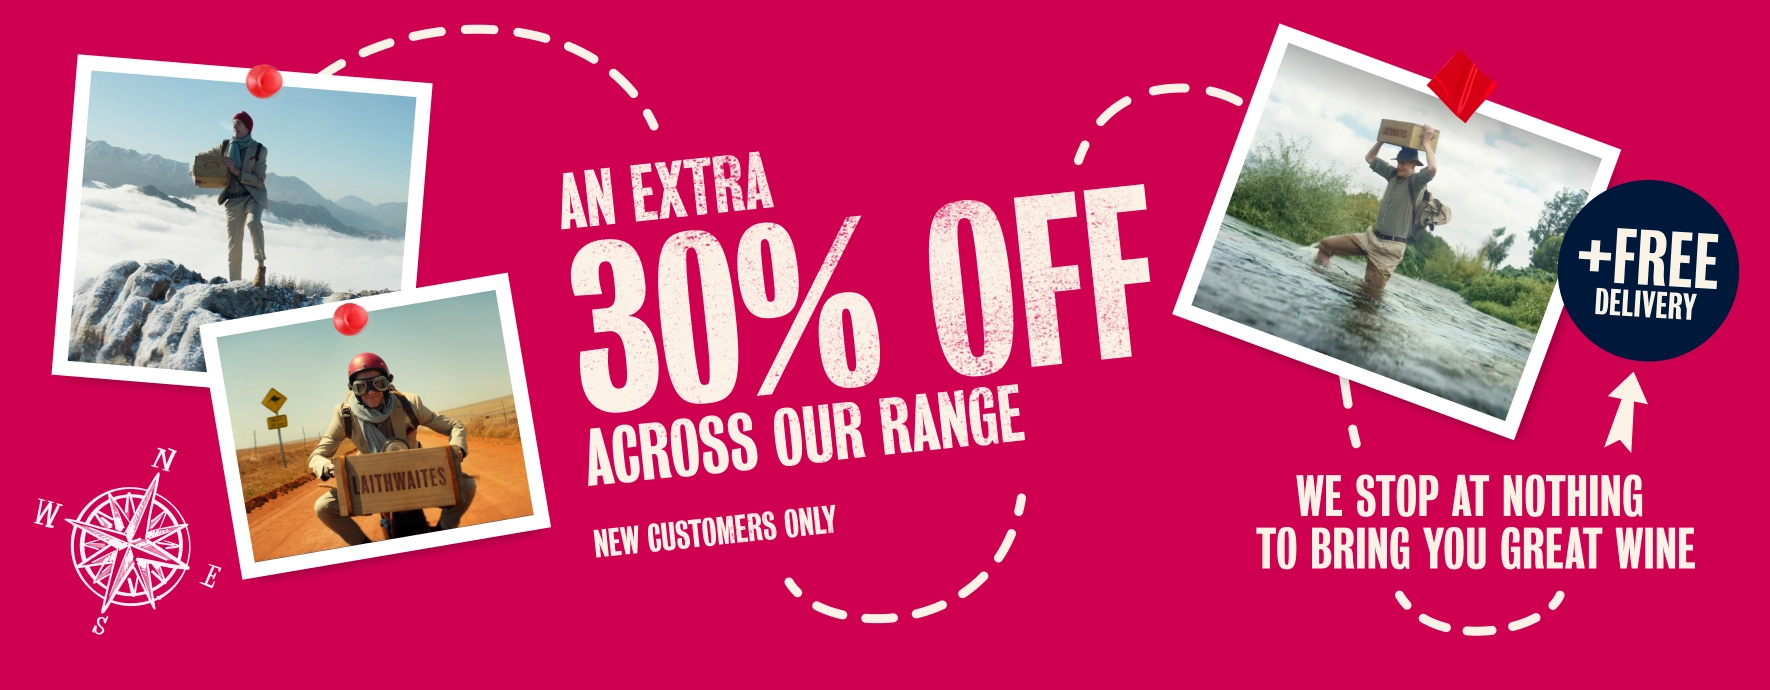 An extra 30% OFF - across our range + Free Delivery